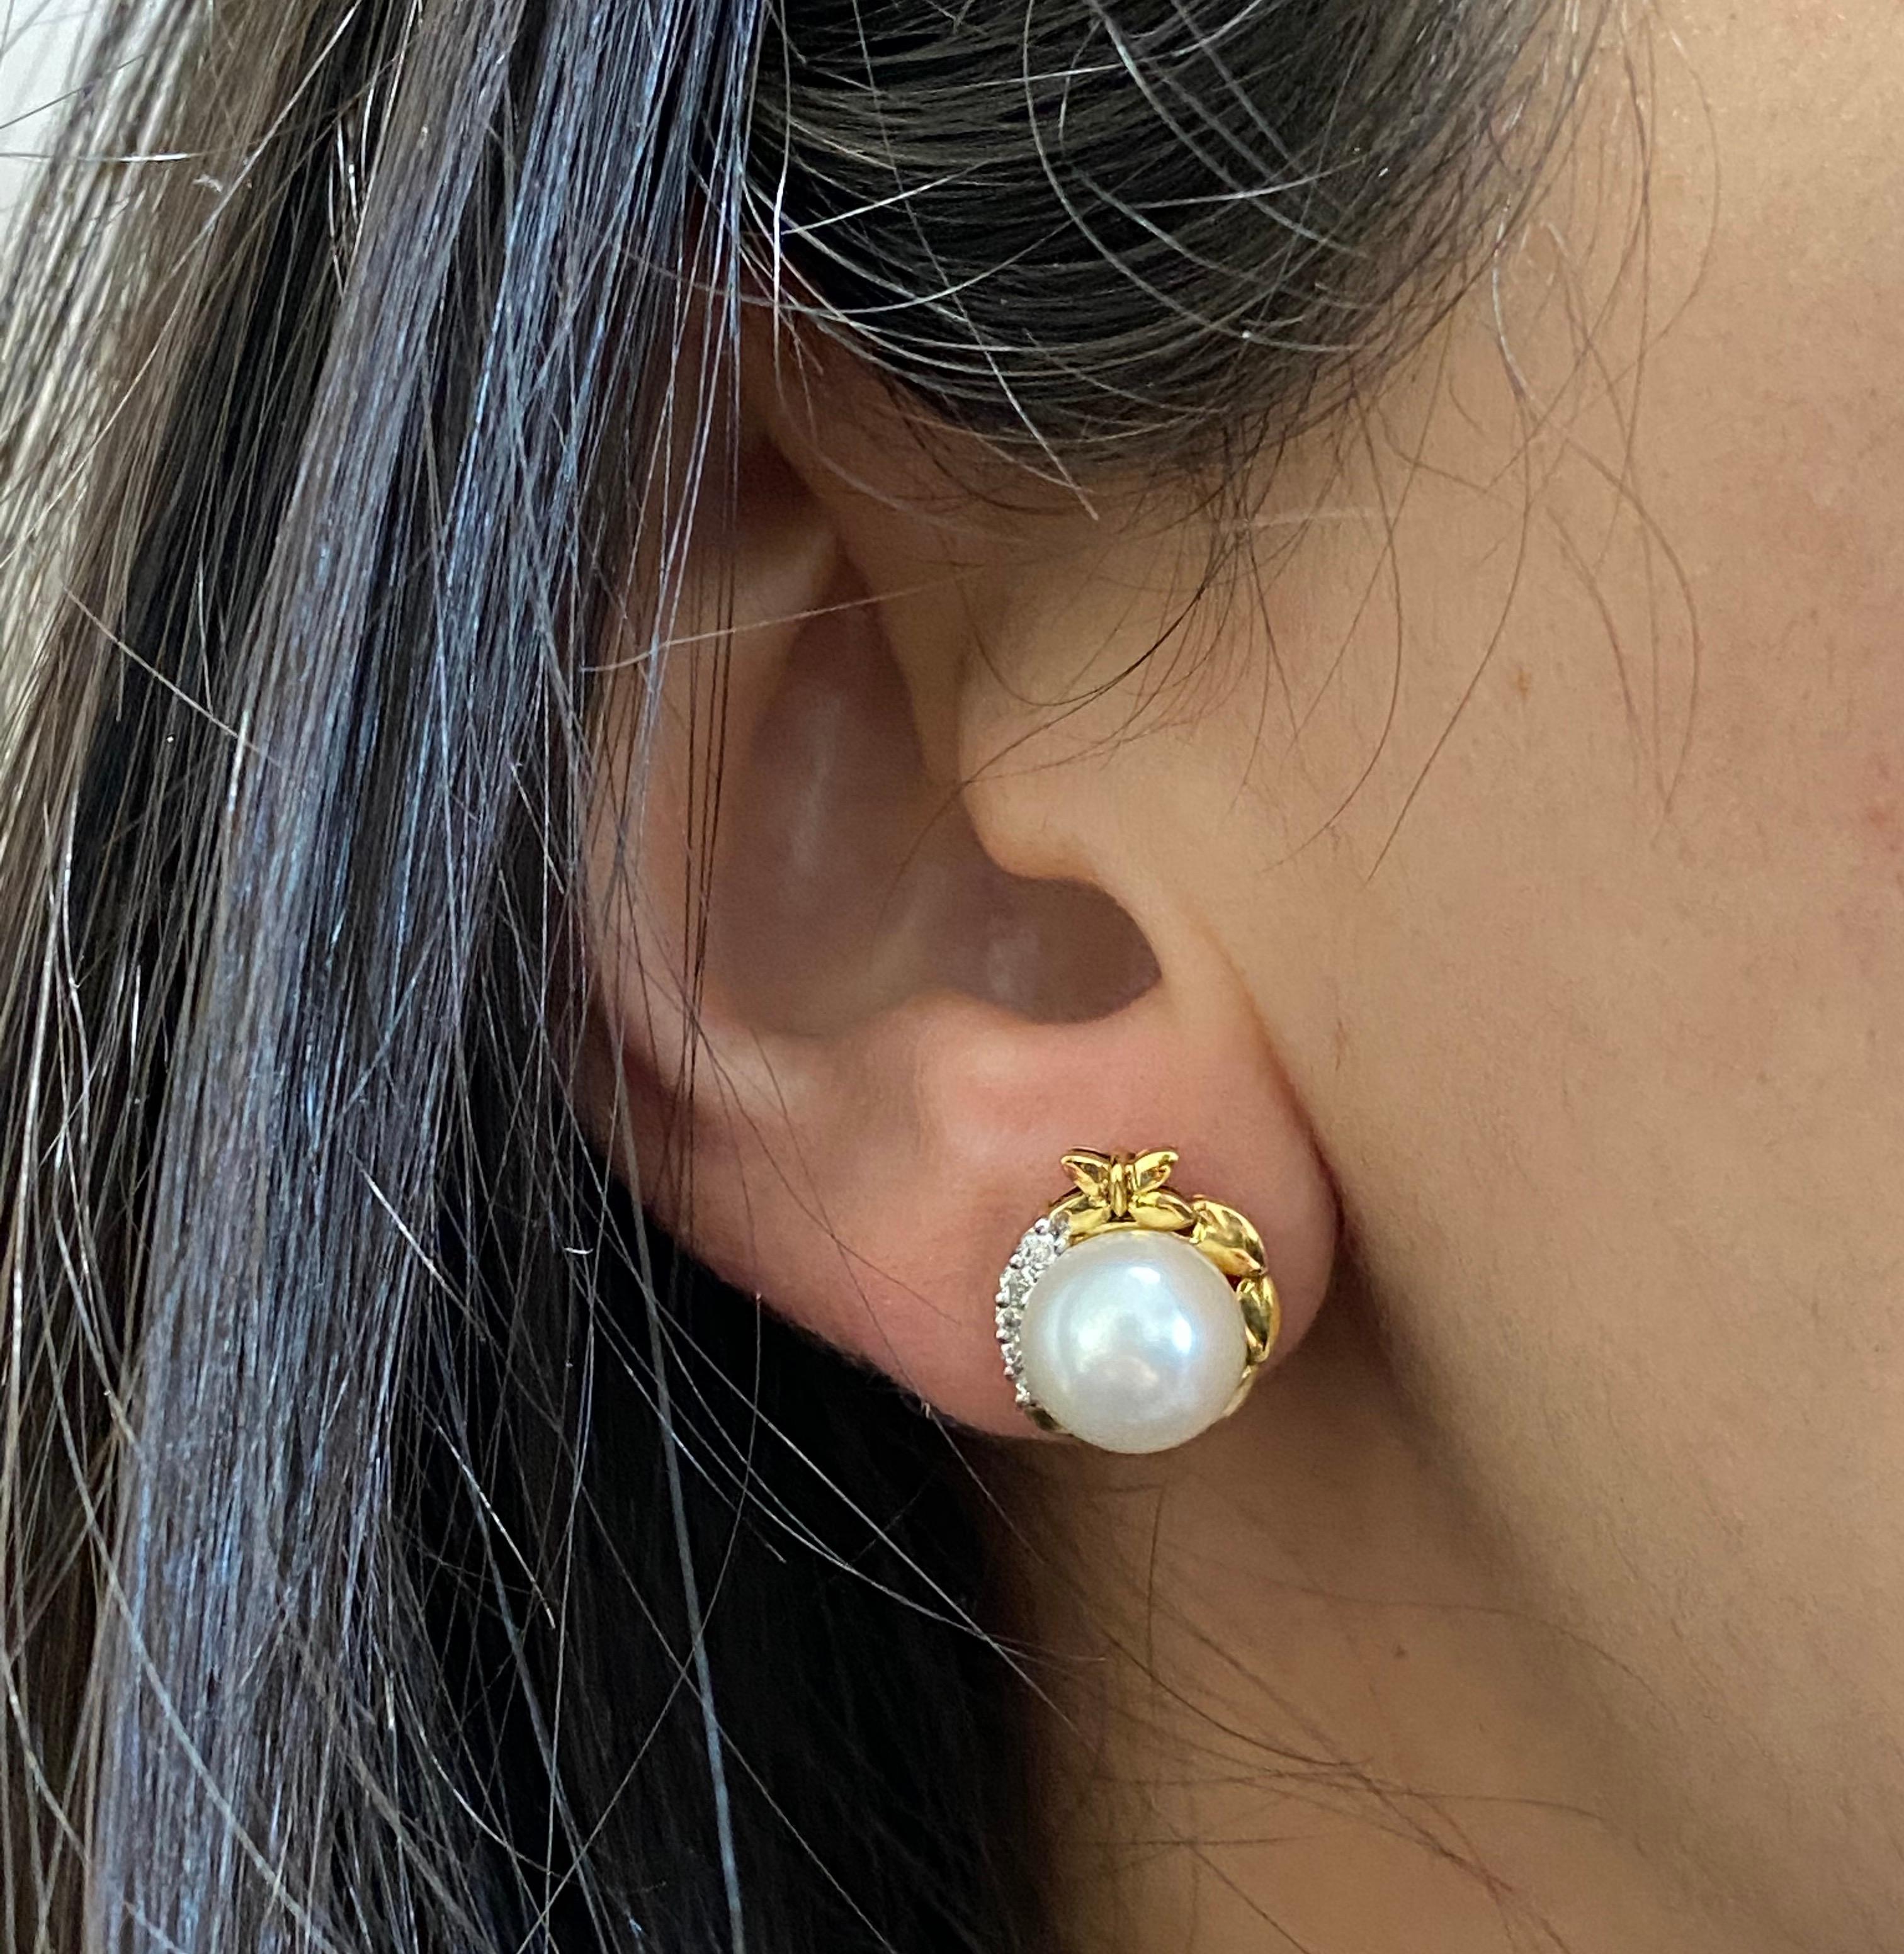 Material: 18K Yellow Gold 
Stone Details: 2 Round Pearls at 1.87 Carats 
Diamond Details: Brilliant Round White Diamonds at 0.14 Carats Total- Clarity: VS-SI / Color: H-I
This piece measures approximately 13 millimeters.

Fine one-of-a-kind